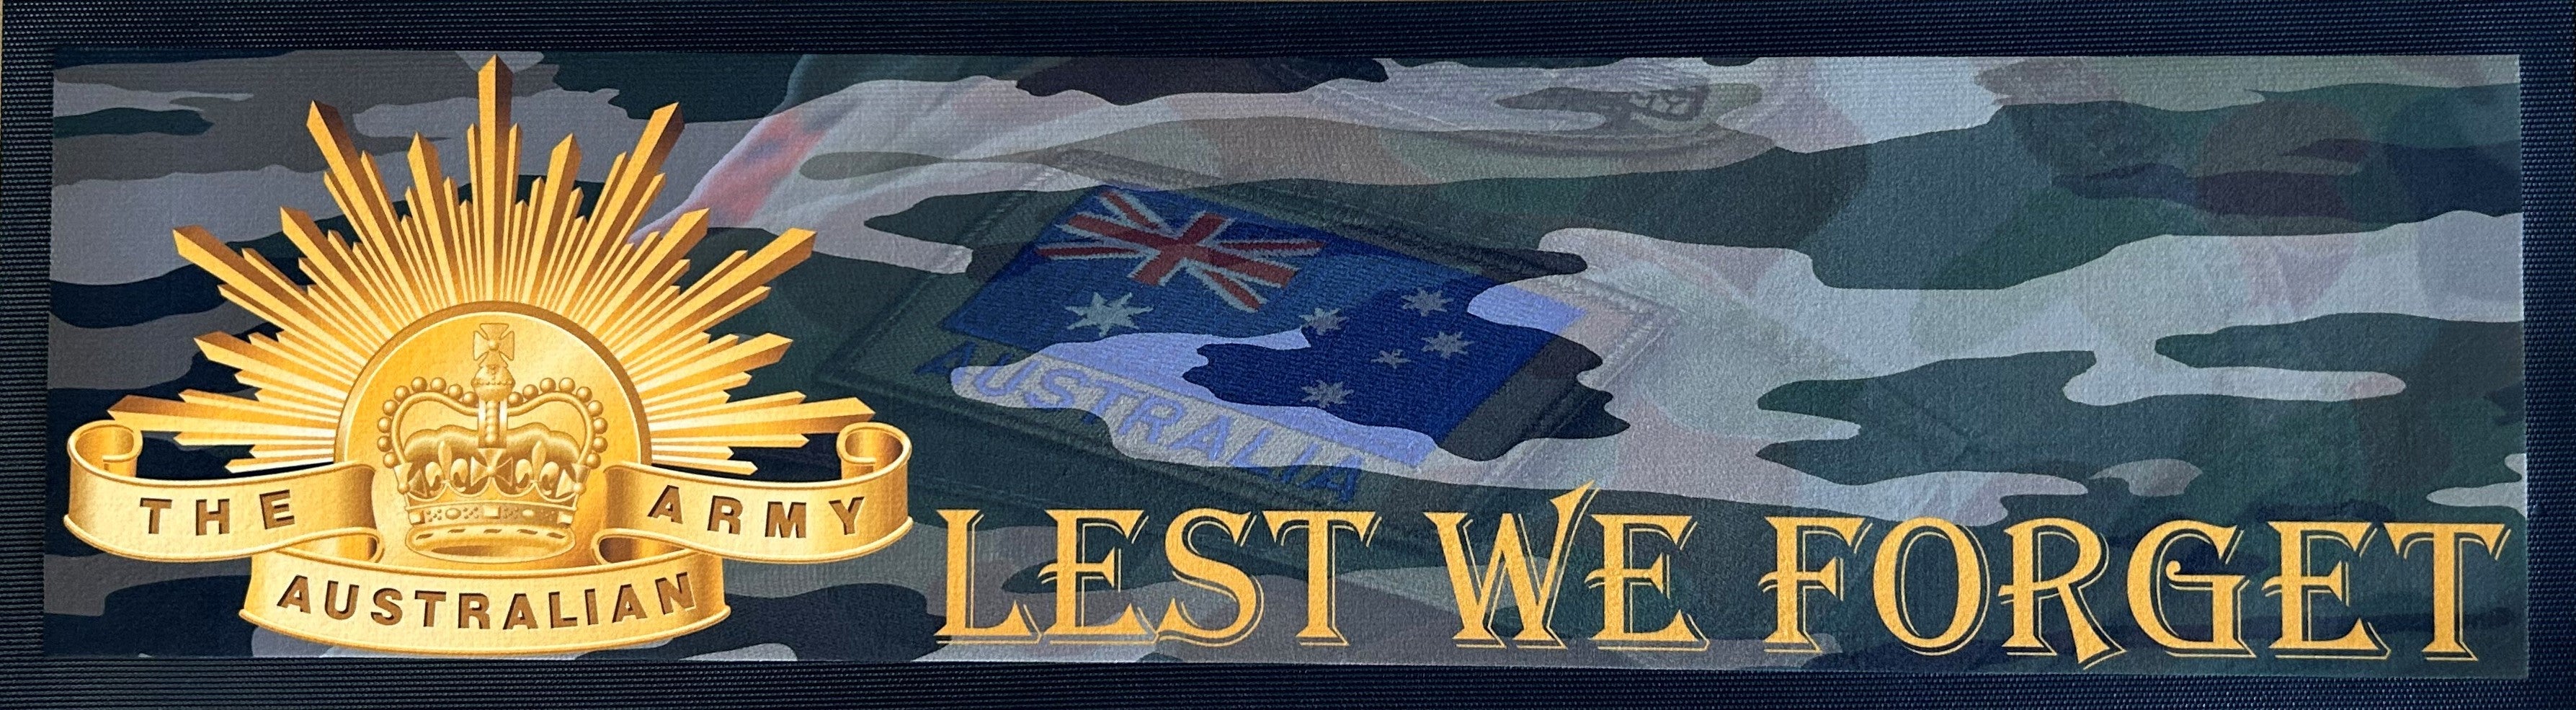 Lest We Forget Camouflage Premium Rubber-Backed Bar Mat Runner - KING CAVE